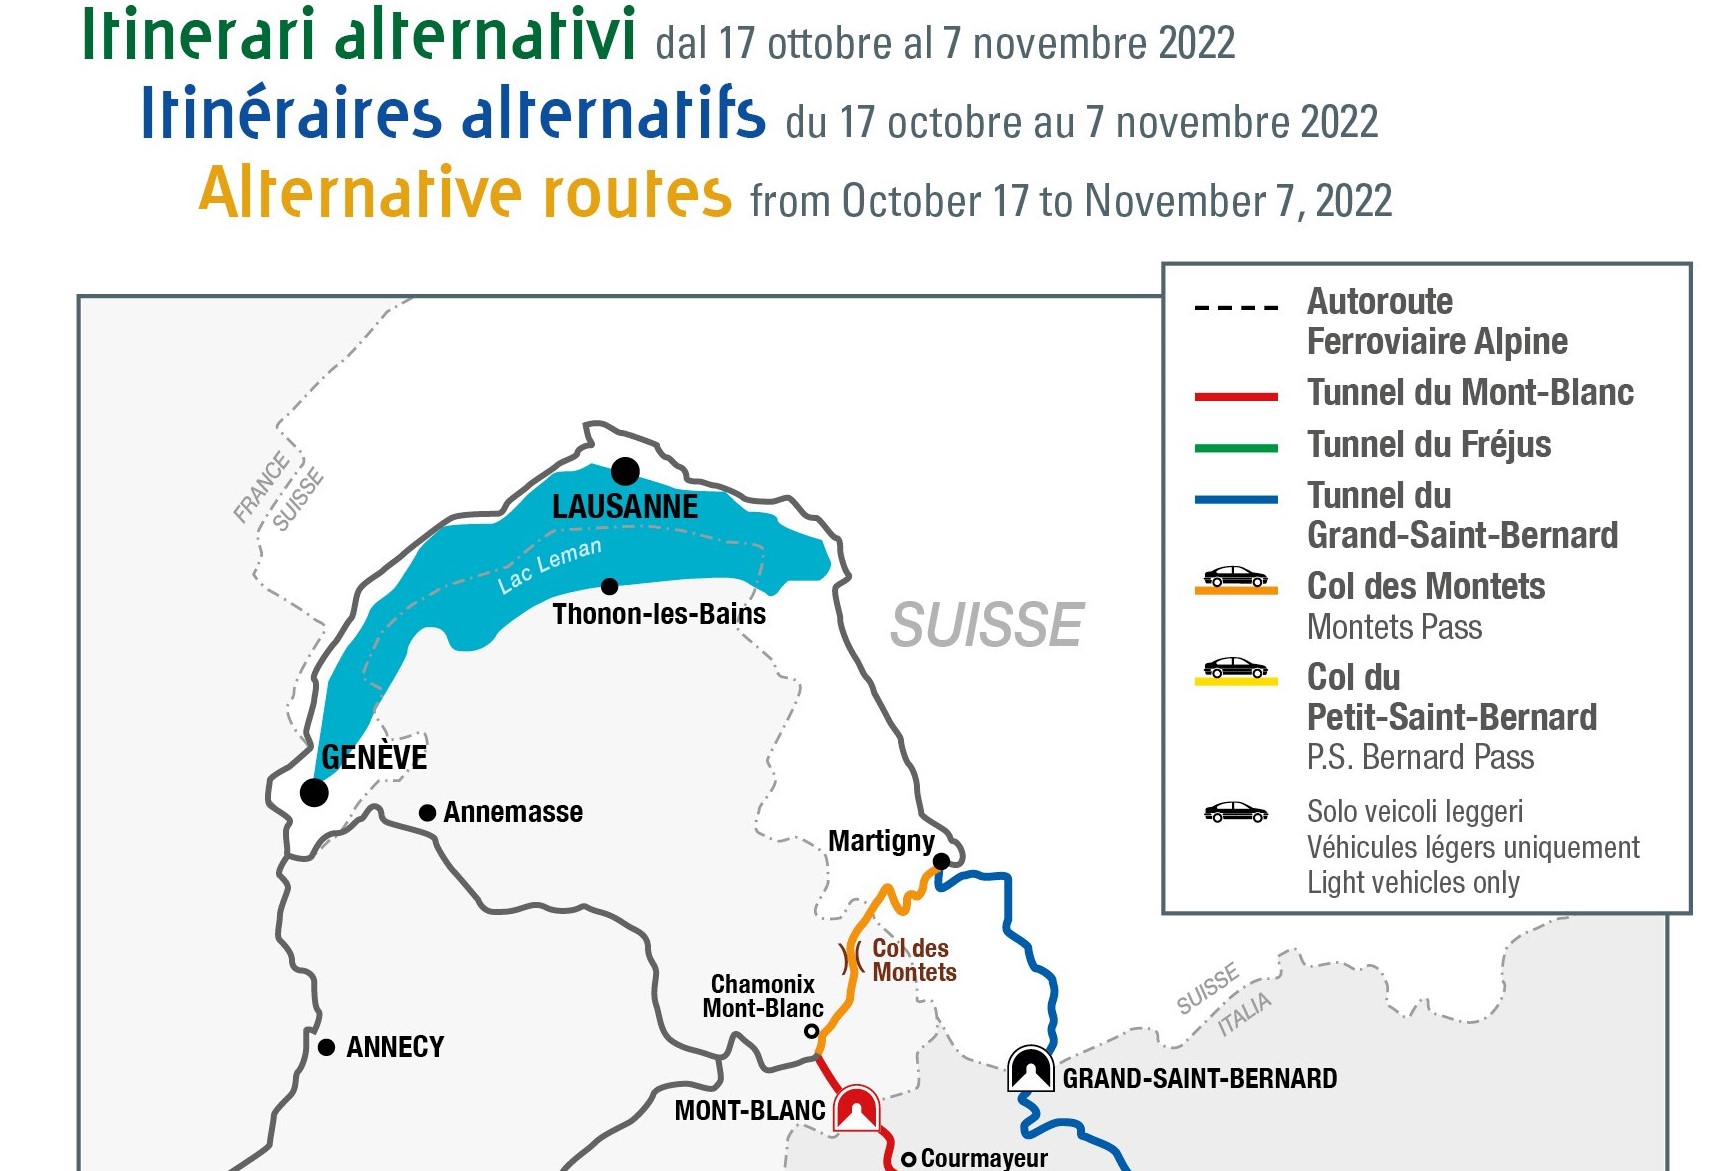 TOTAL CLOSURE OF 21 CONSECUTIVE DAYS - Suggested alternative routes from October 17 to November 7, 2022